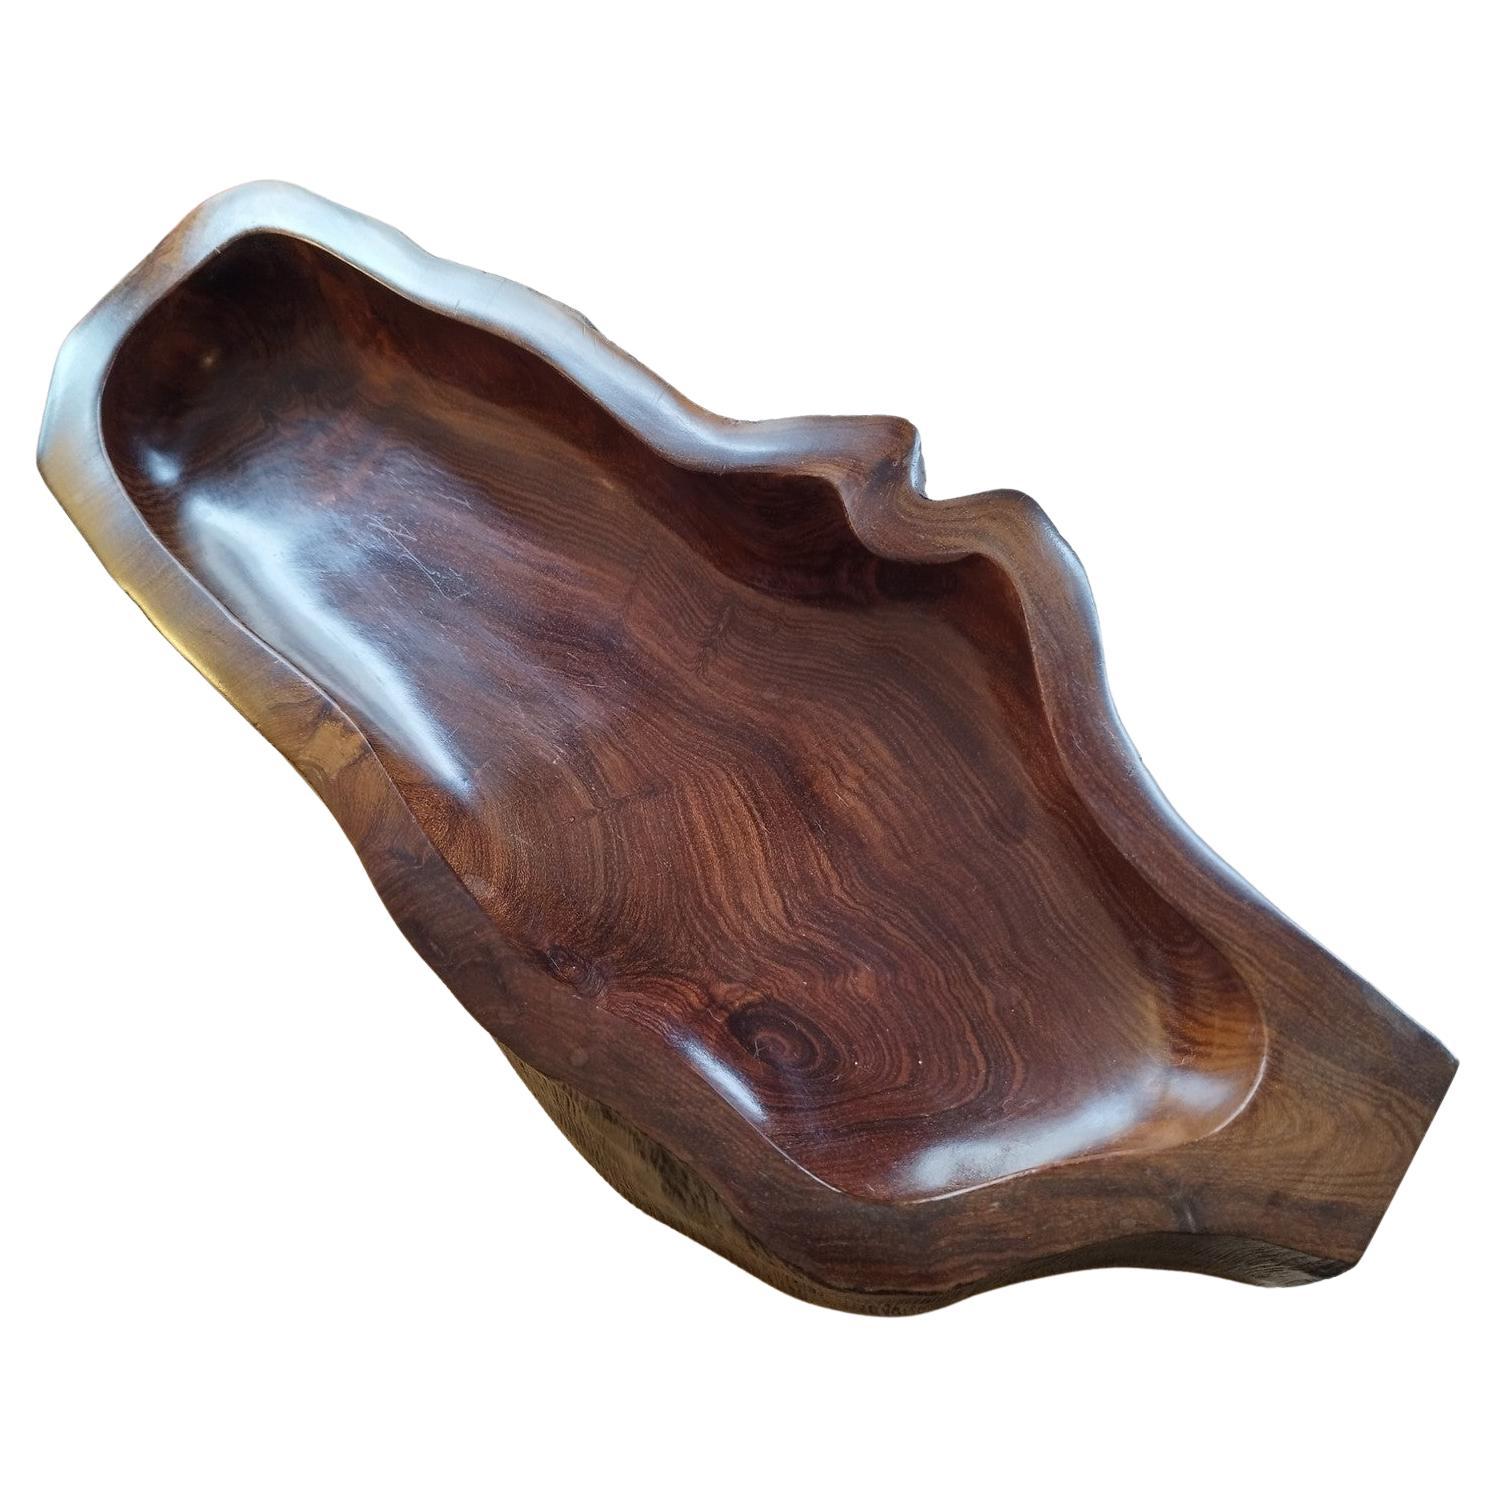 Gorgeous wooden piece from Brazil, circa 1960. The inside is very polished and smooth, and the external is rough. Similar to pieces created by Jean Gillon.
Do not hesitate to ask me for a shipping quote.